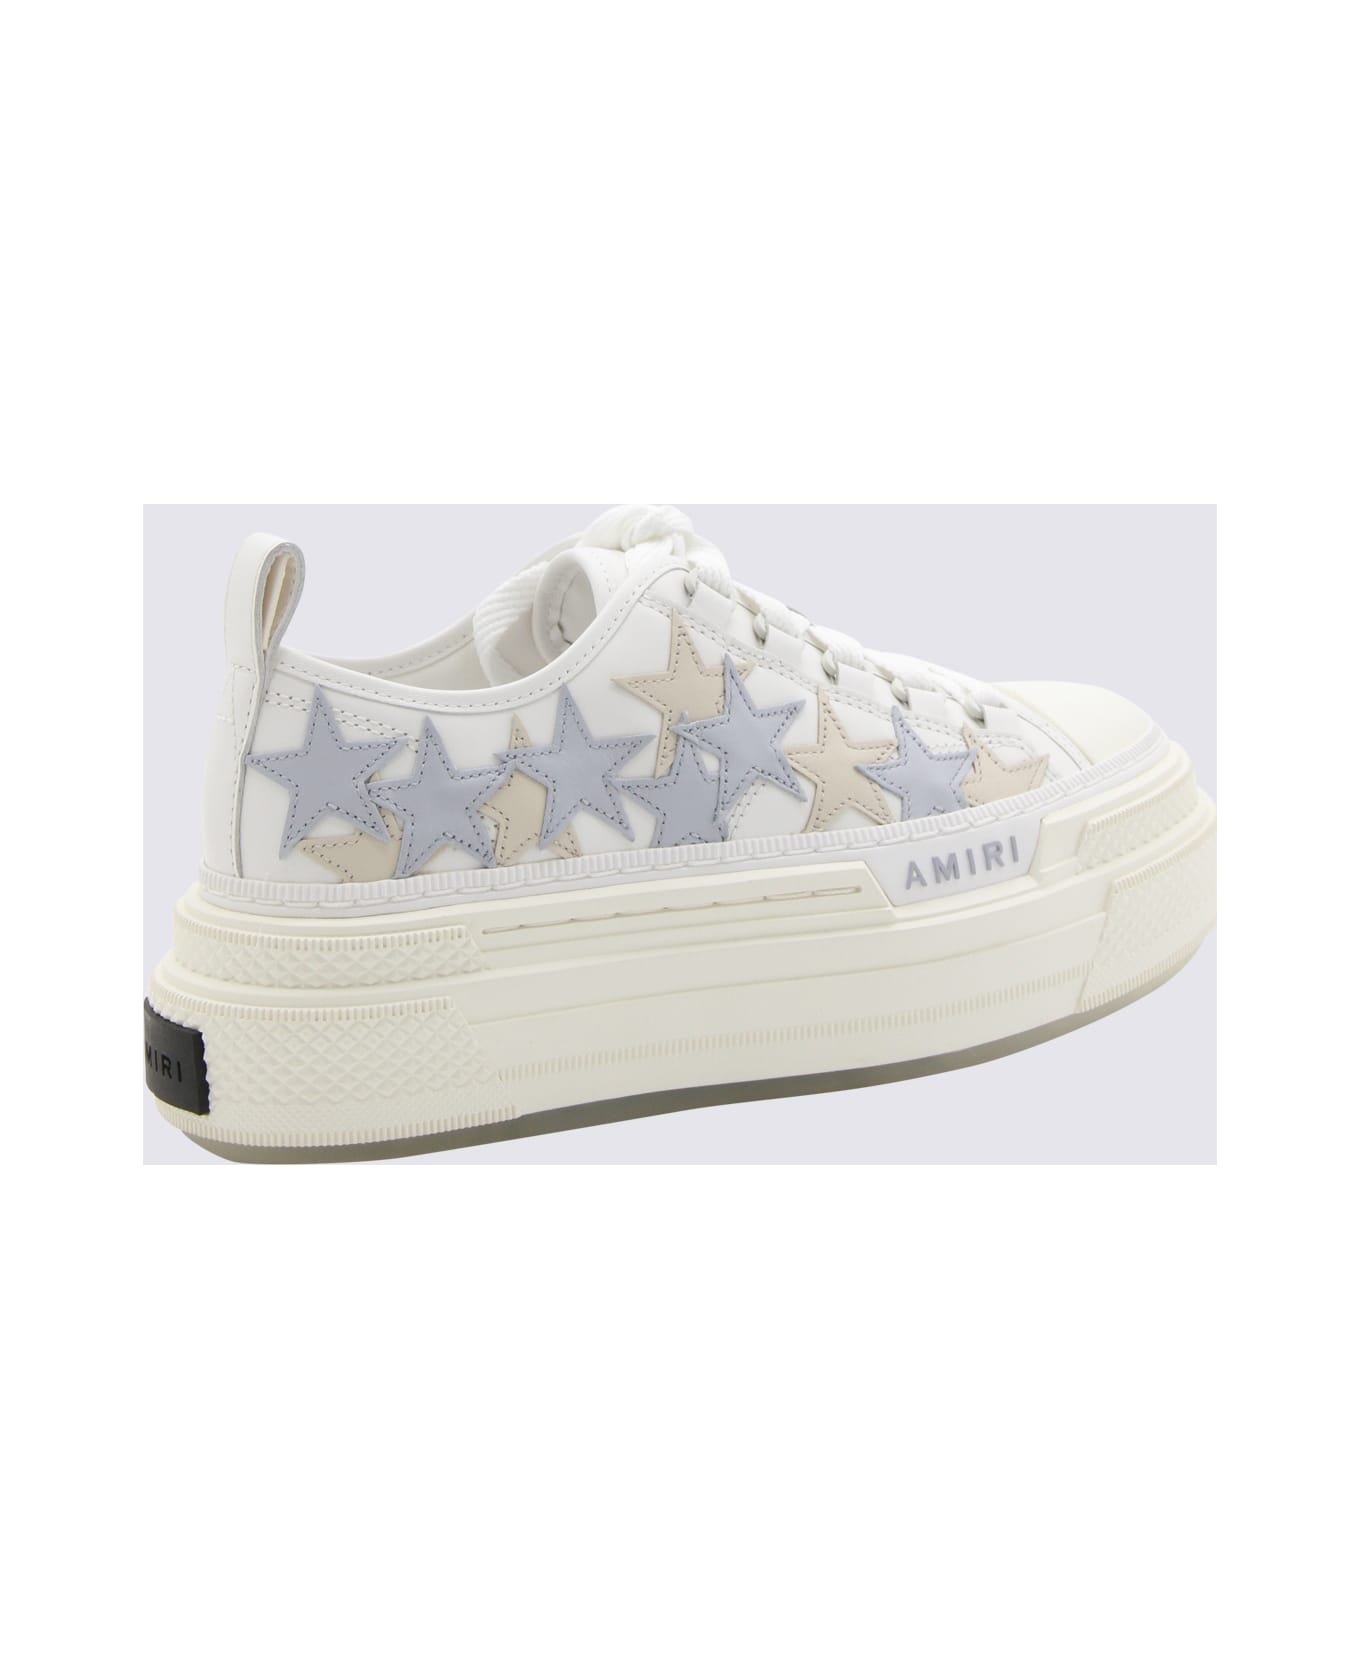 AMIRI White And Blue Leather Sneakers - GREY BLUE